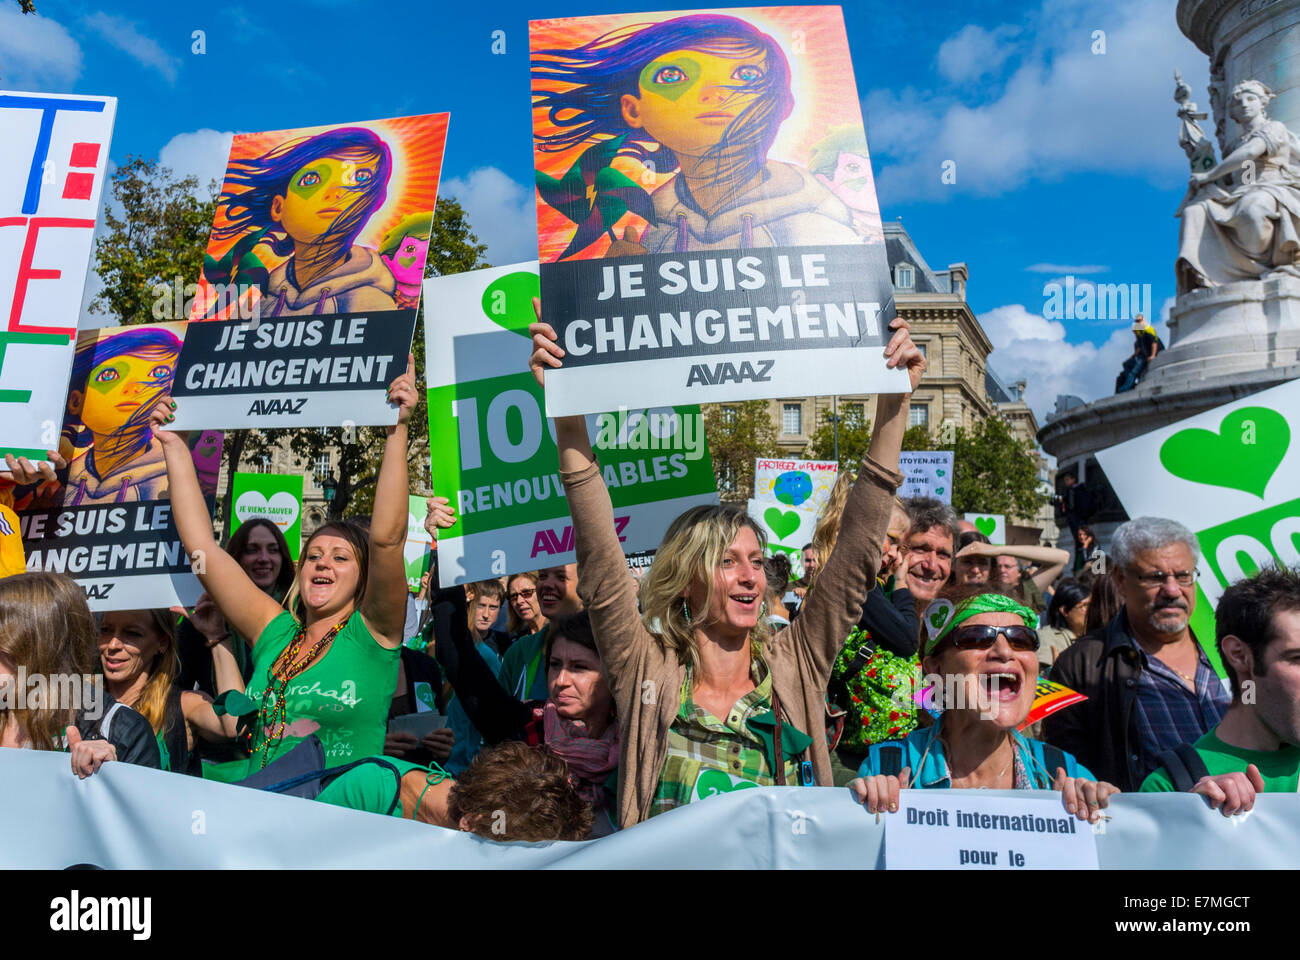 Paris, France. Women Activists Holding French protest poster  at  Public Demonstration, International UN Climate Change protest sign, international NGO  'I am the Change' (AVAAZ) Large Crowd people Front, street, demonstration protests, international Politics Stock Photo